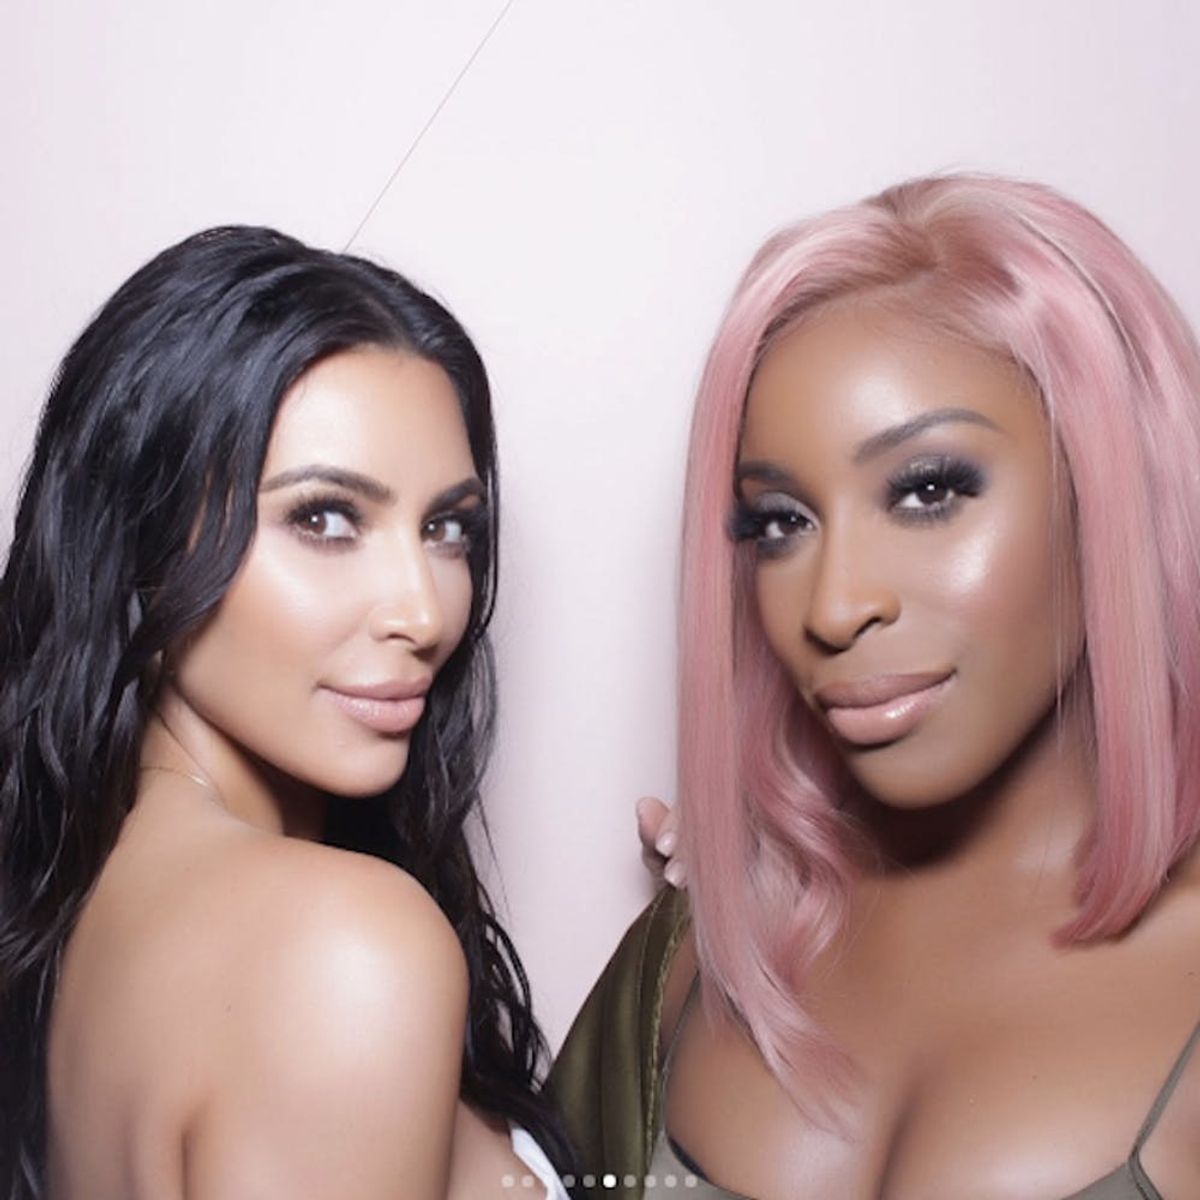 Here’s What Really Went Down Between Kim Kardashian and Beauty Vlogger Jackie Aina